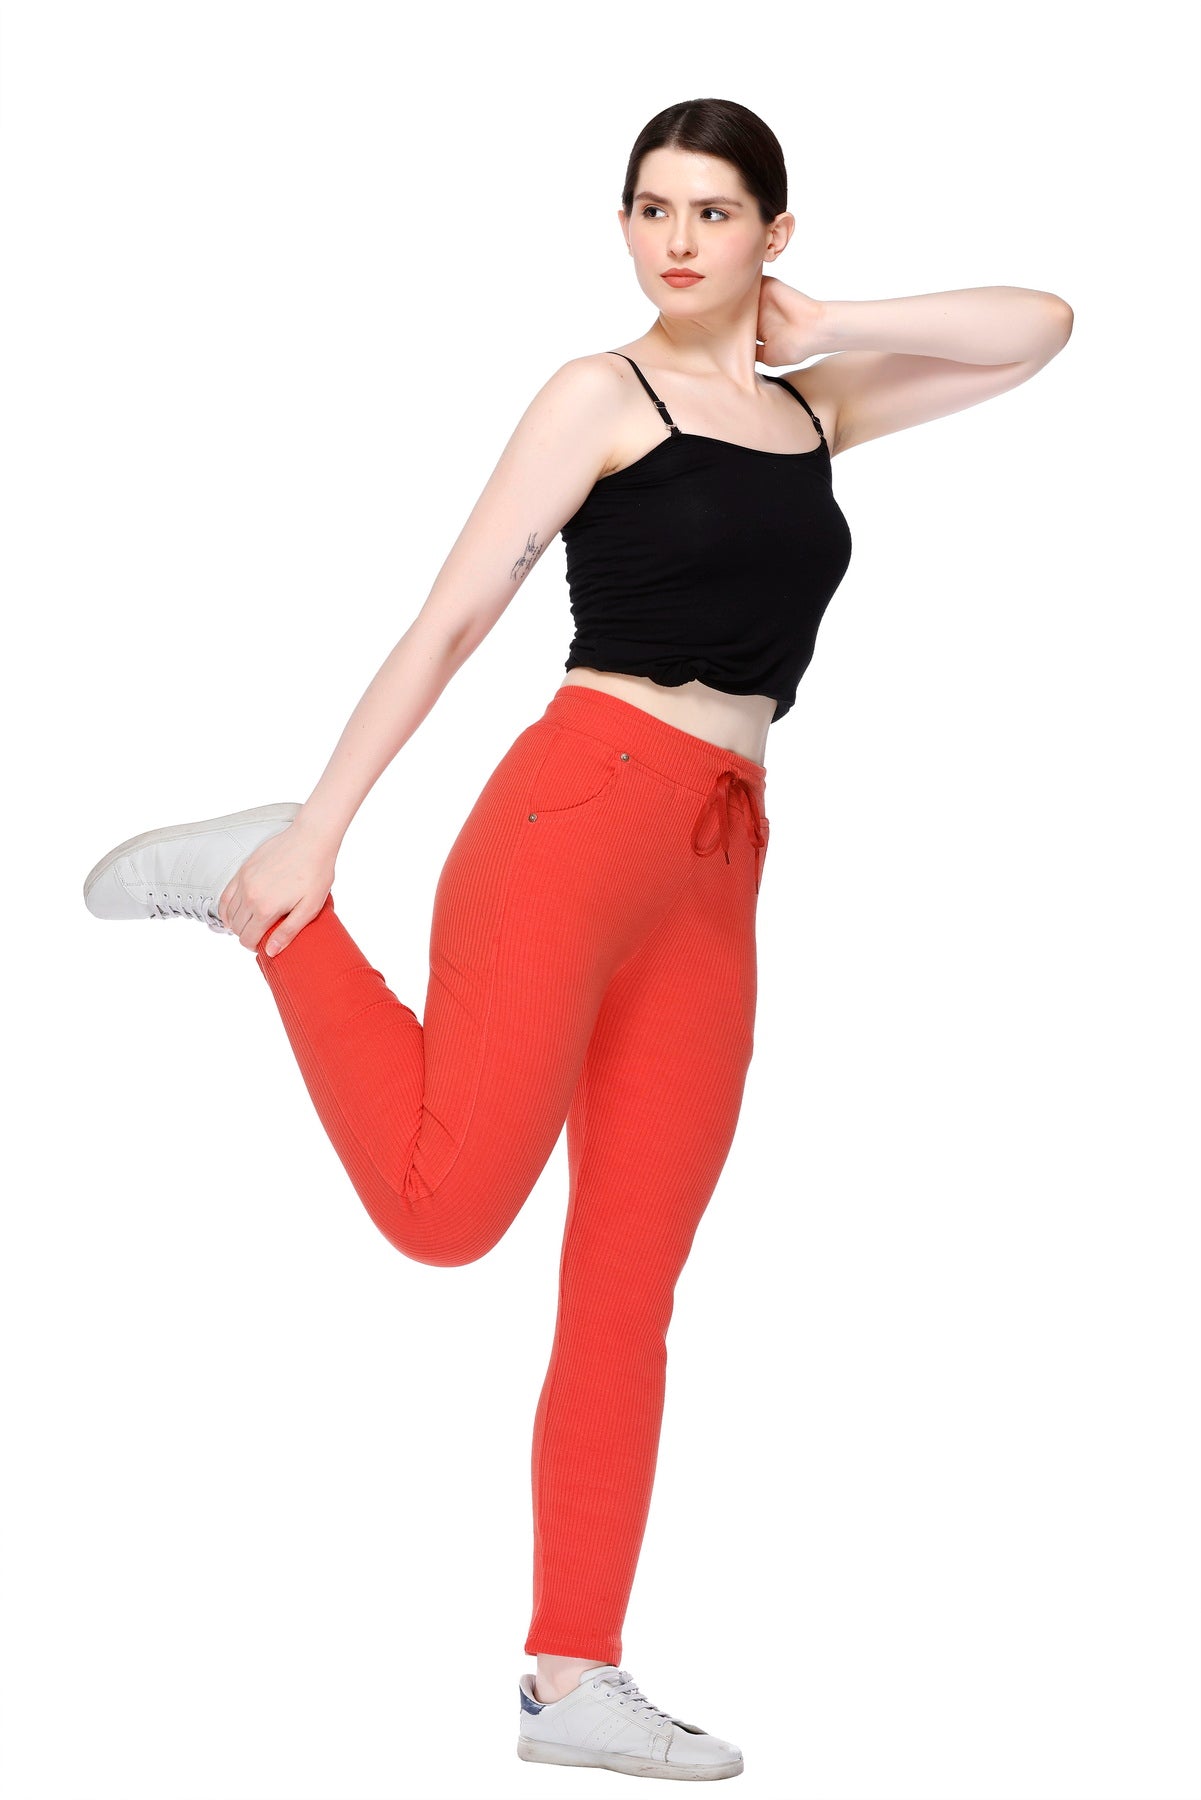 Buy Yoga Clothes For Women, Yoga Leggings, Yoga Wear For Women Online India-  SEEQ